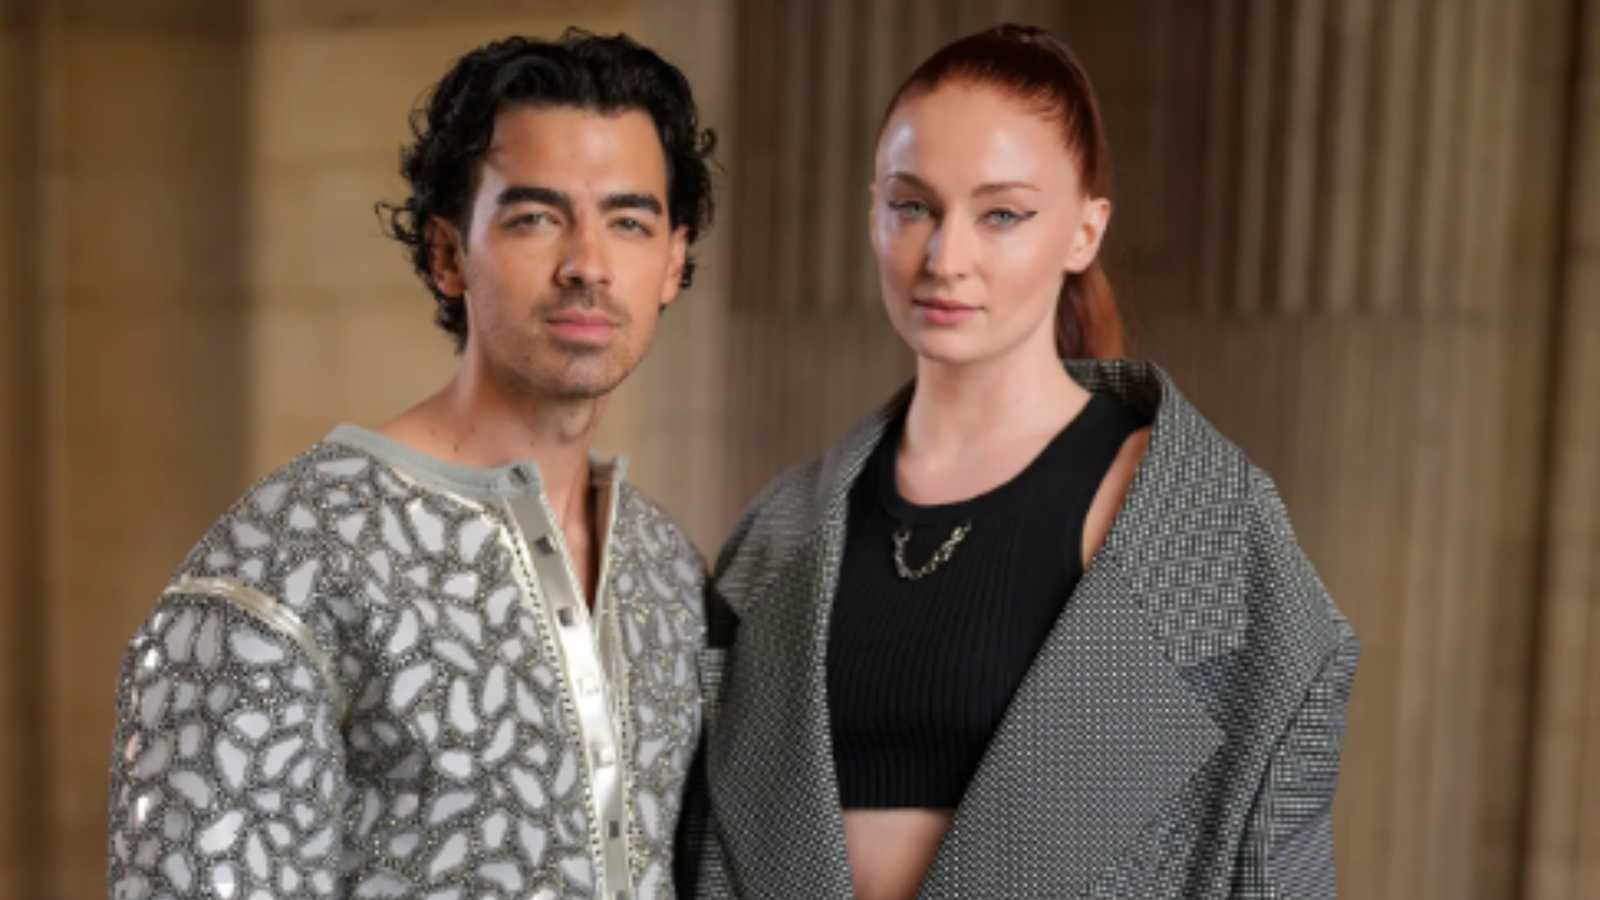 Sophie Turner and Joe Jonas were planning to purchase a lavish home together before separation? Here's what we know